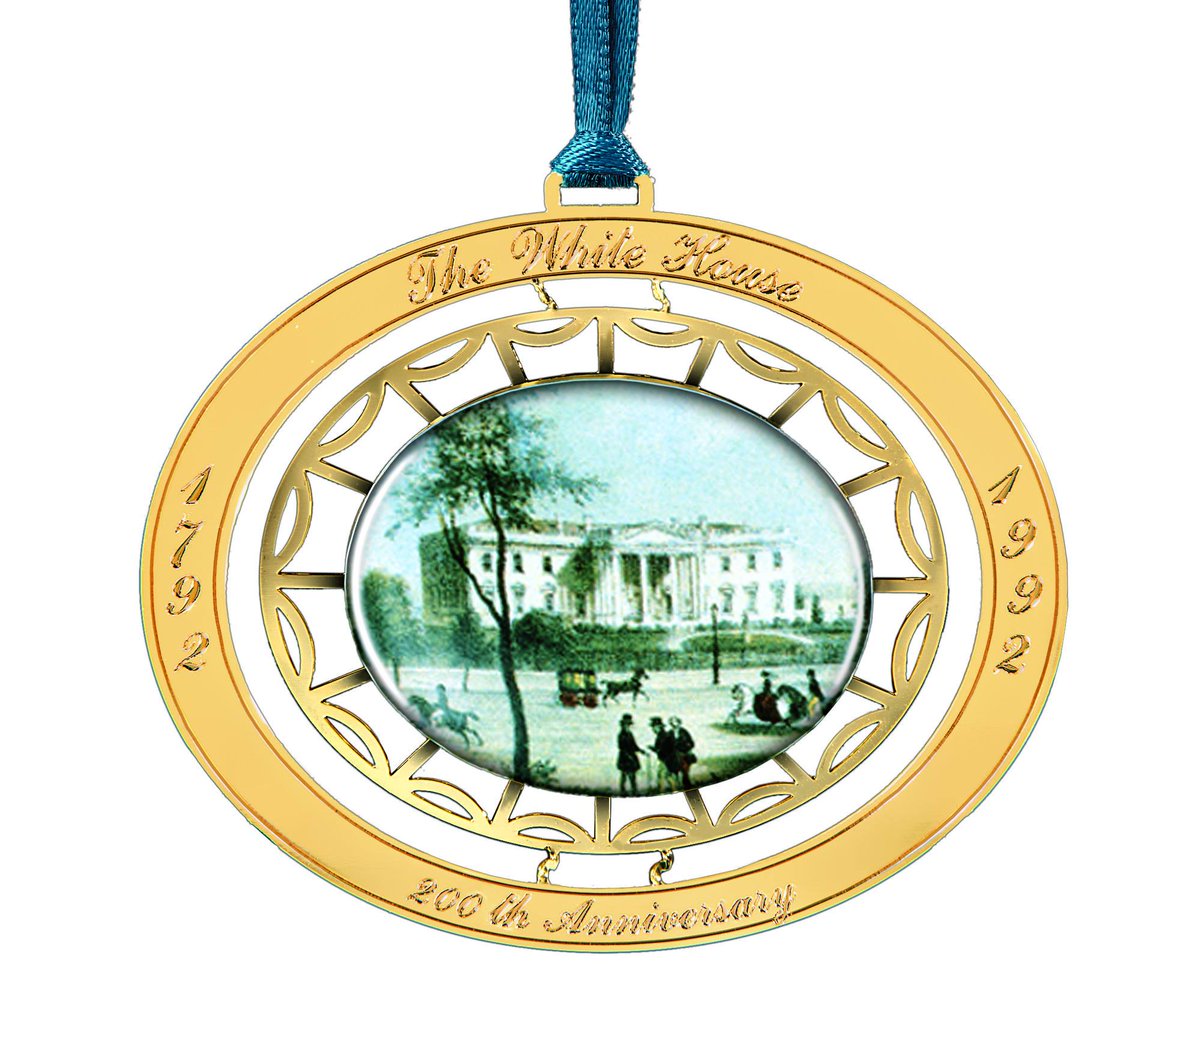 1992 marked the bicentennial of the laying of the White House Cornerstone. The 1992 White House anniversary ornament commemorates this milestone with text from the cornerstone and a reproduction of an 1848 watercolor. https://shop.whitehousehistory.org/holidays/ornaments/1990-1993-four-white-hour-ornaments-sold-as-a-set